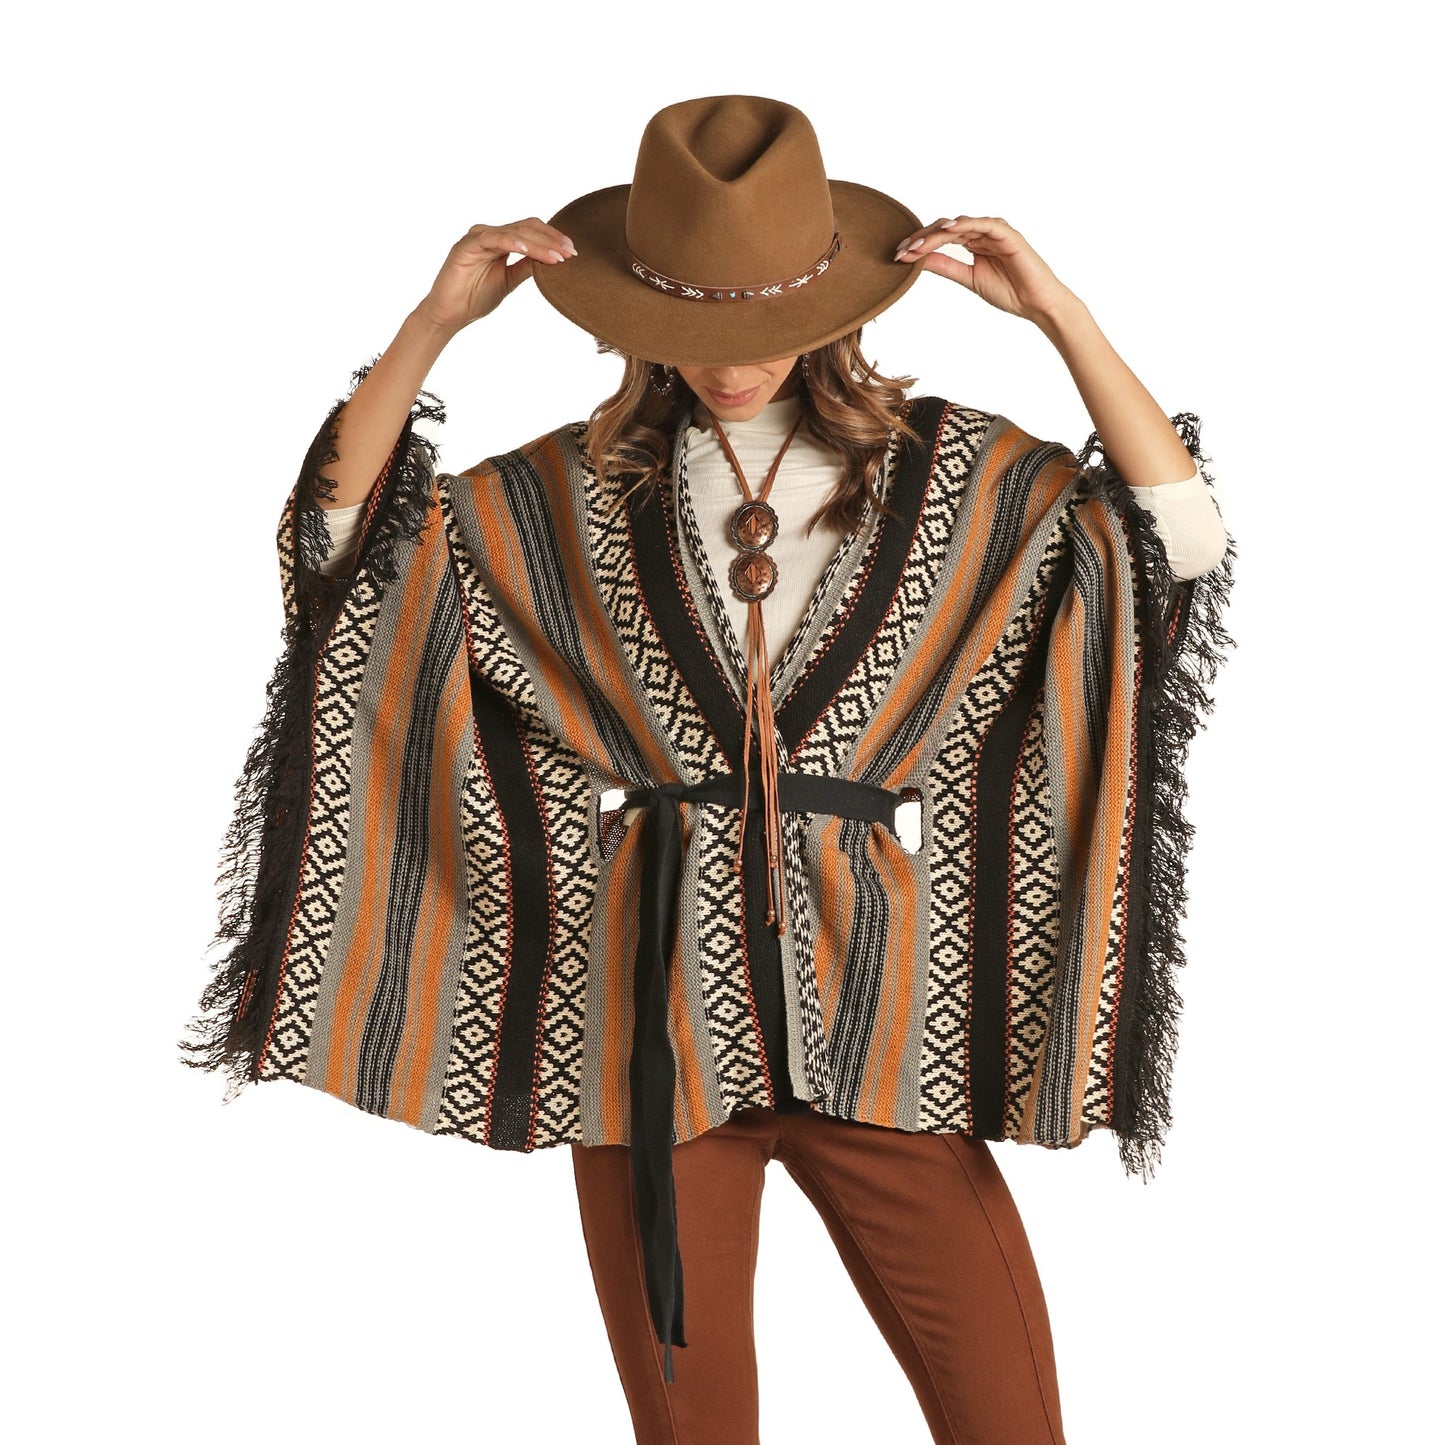 Rock & Roll Cowgirl Ladies Knitted Striped Poncho Shirt 46-1162-42